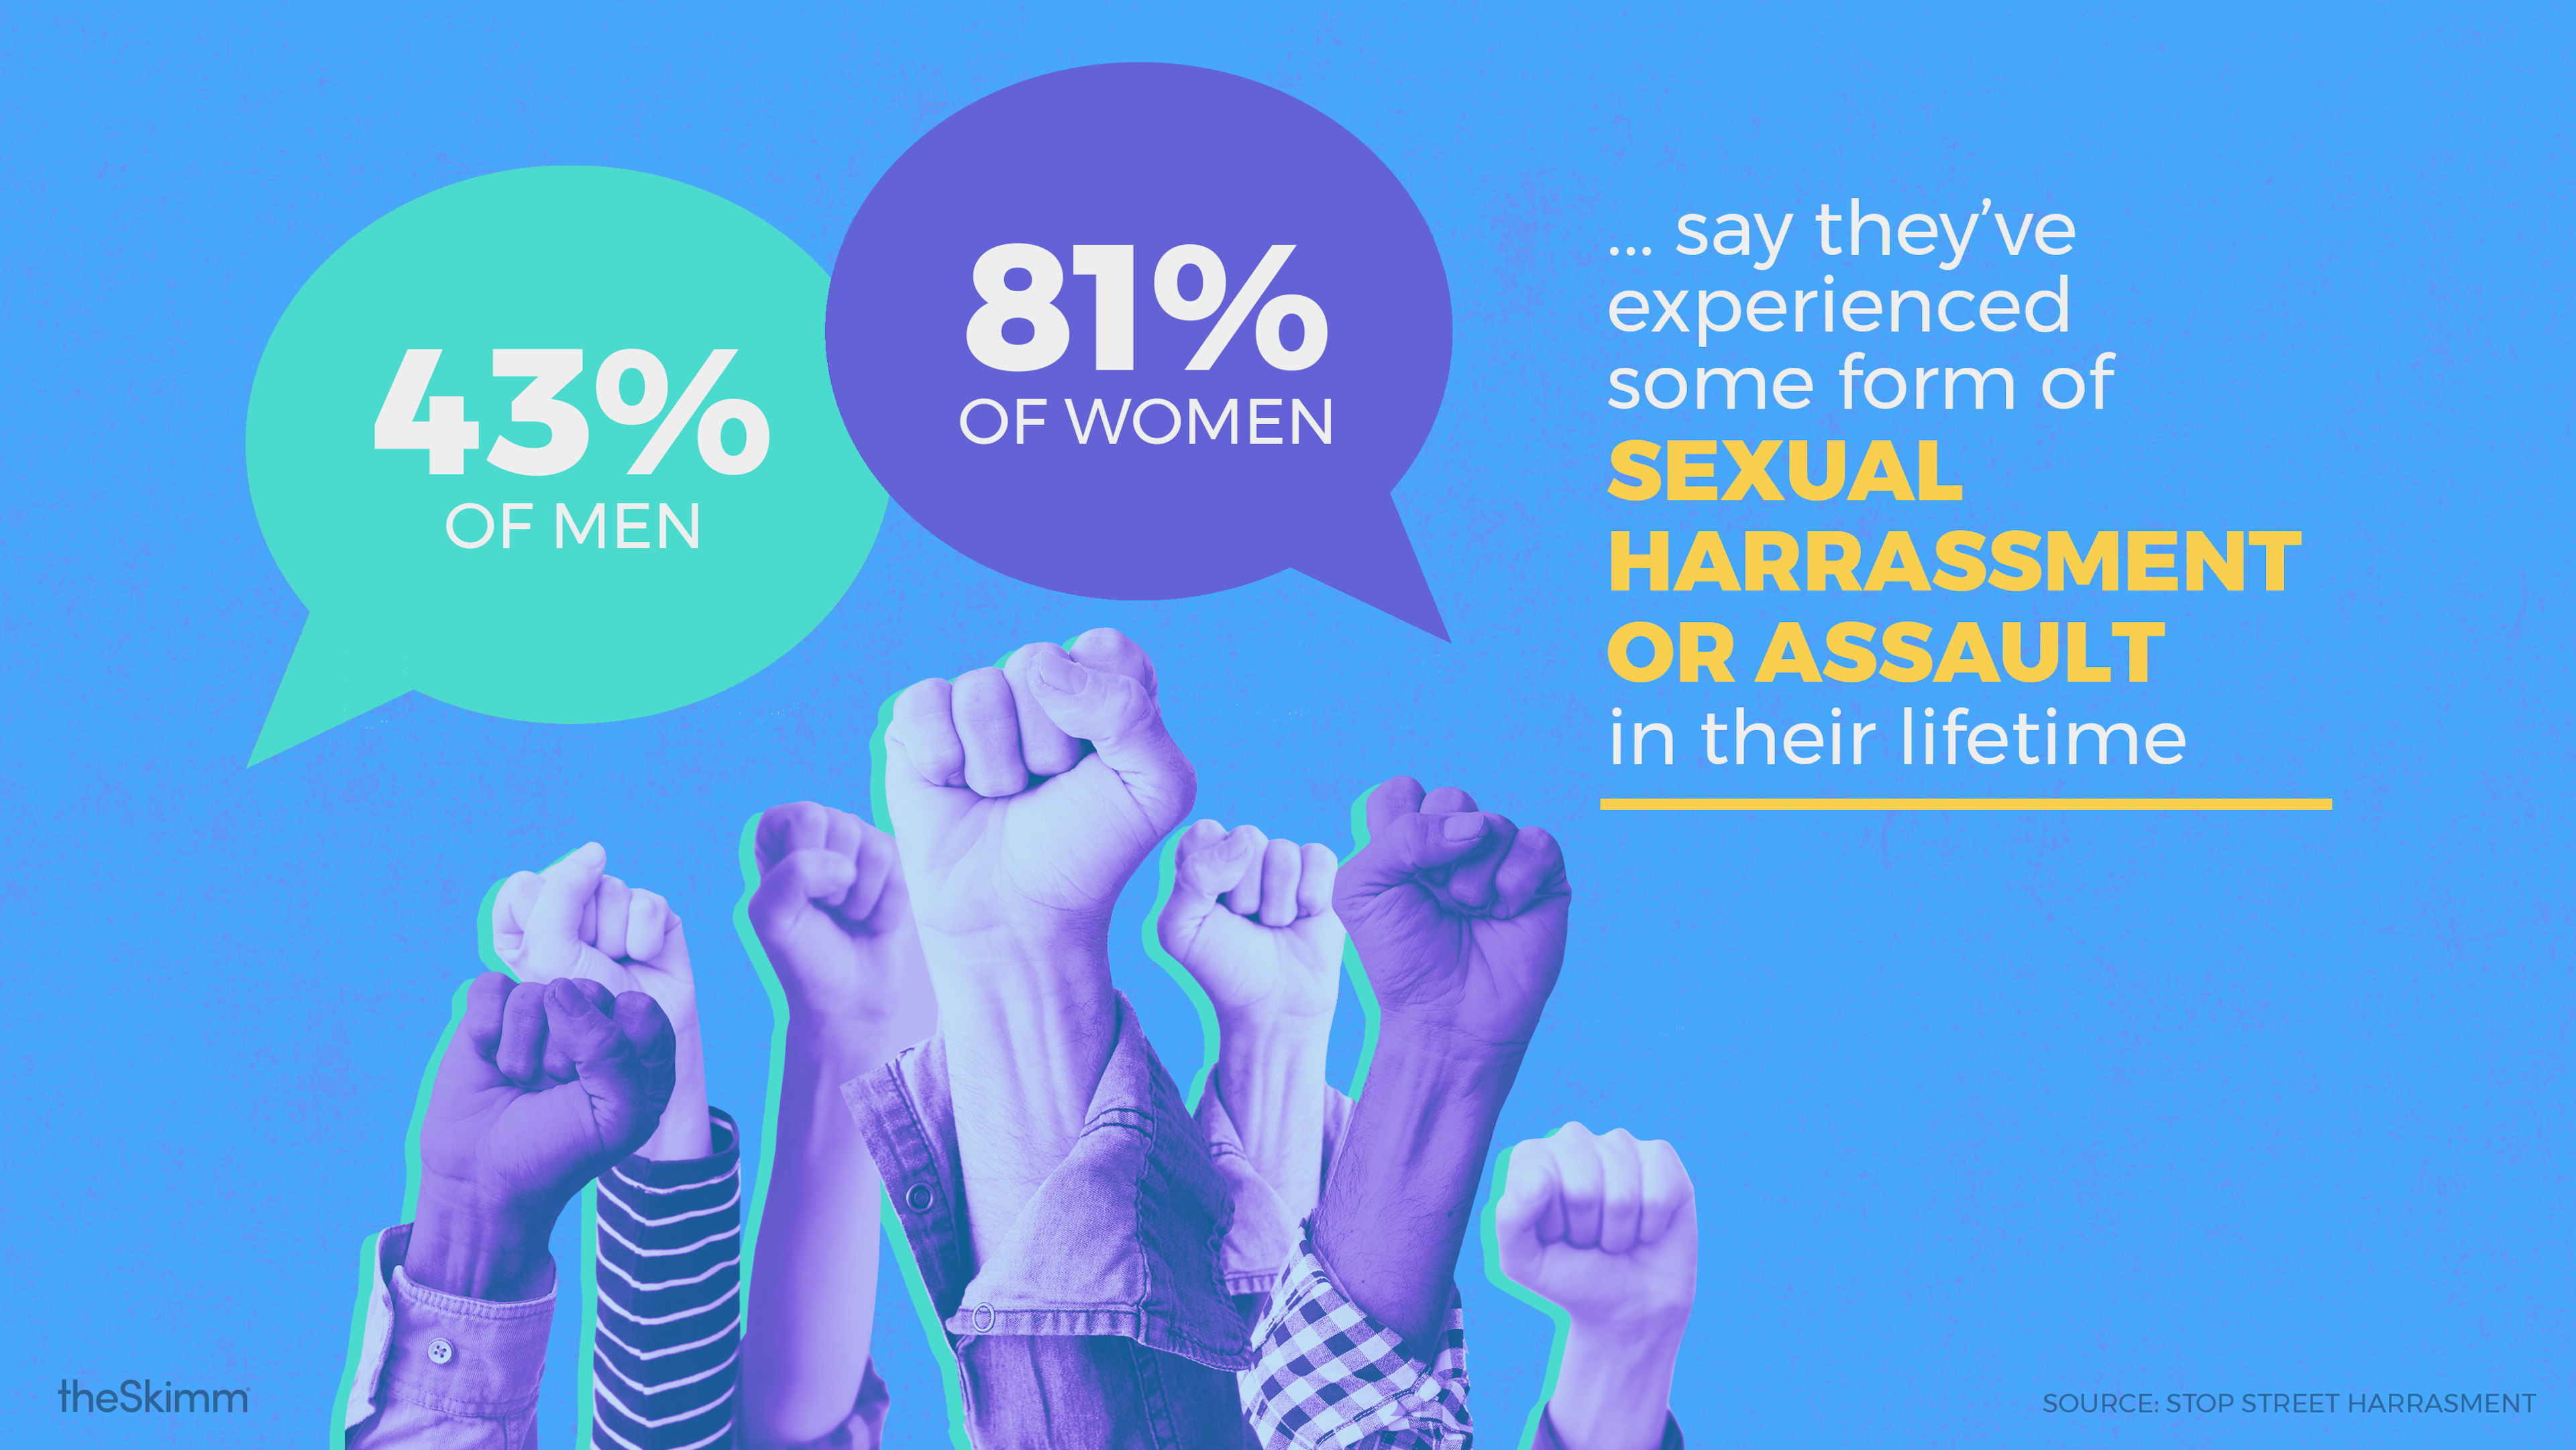 43% of men and 81% of women say they've experienced some form of sexual harassment or assault in their lifetime